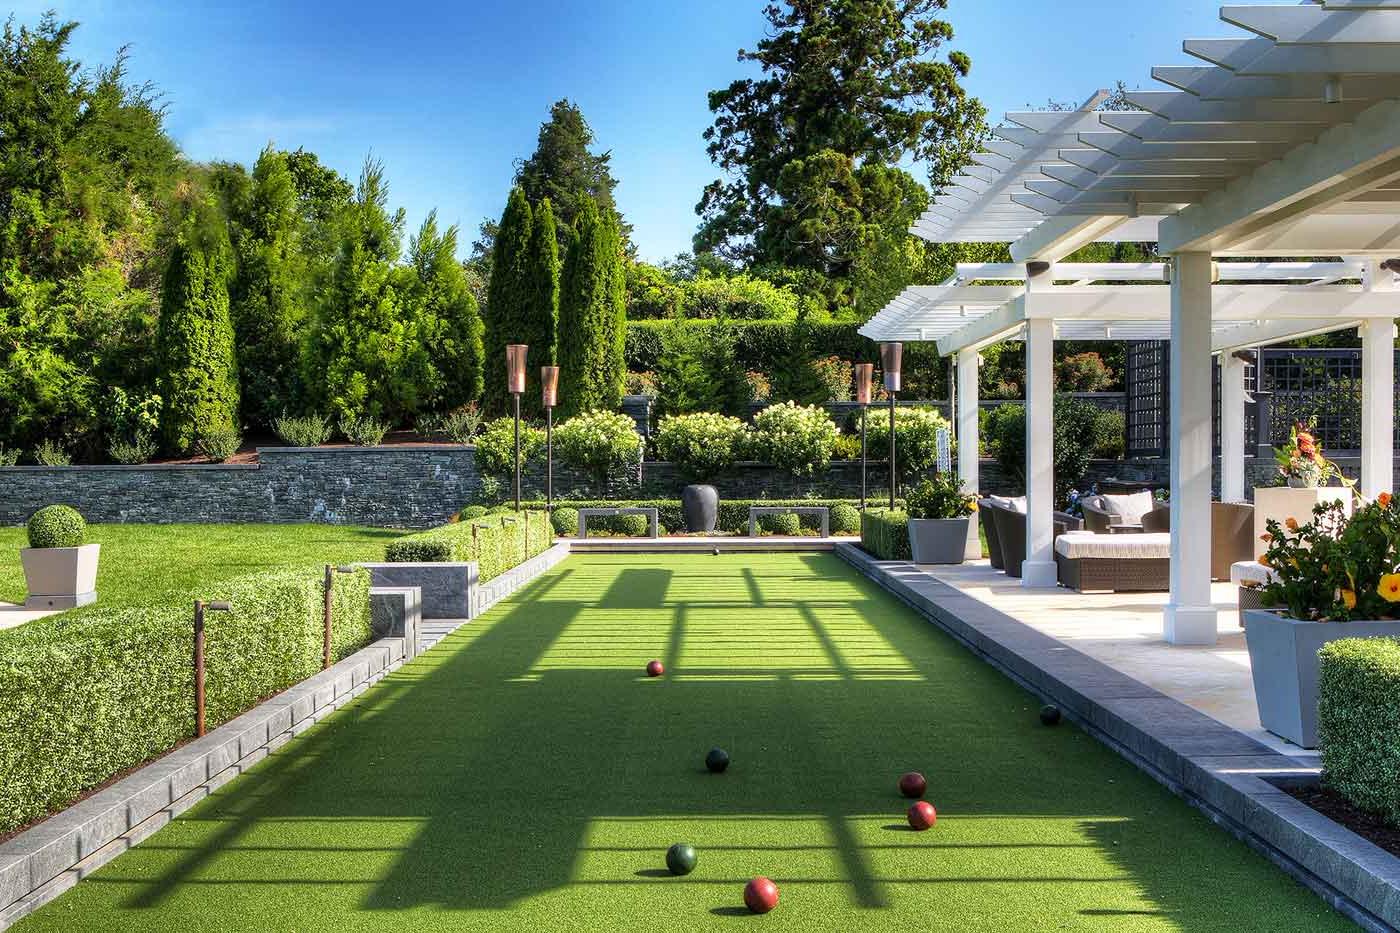 Bocce ball court designed by Katherine Field and Associates